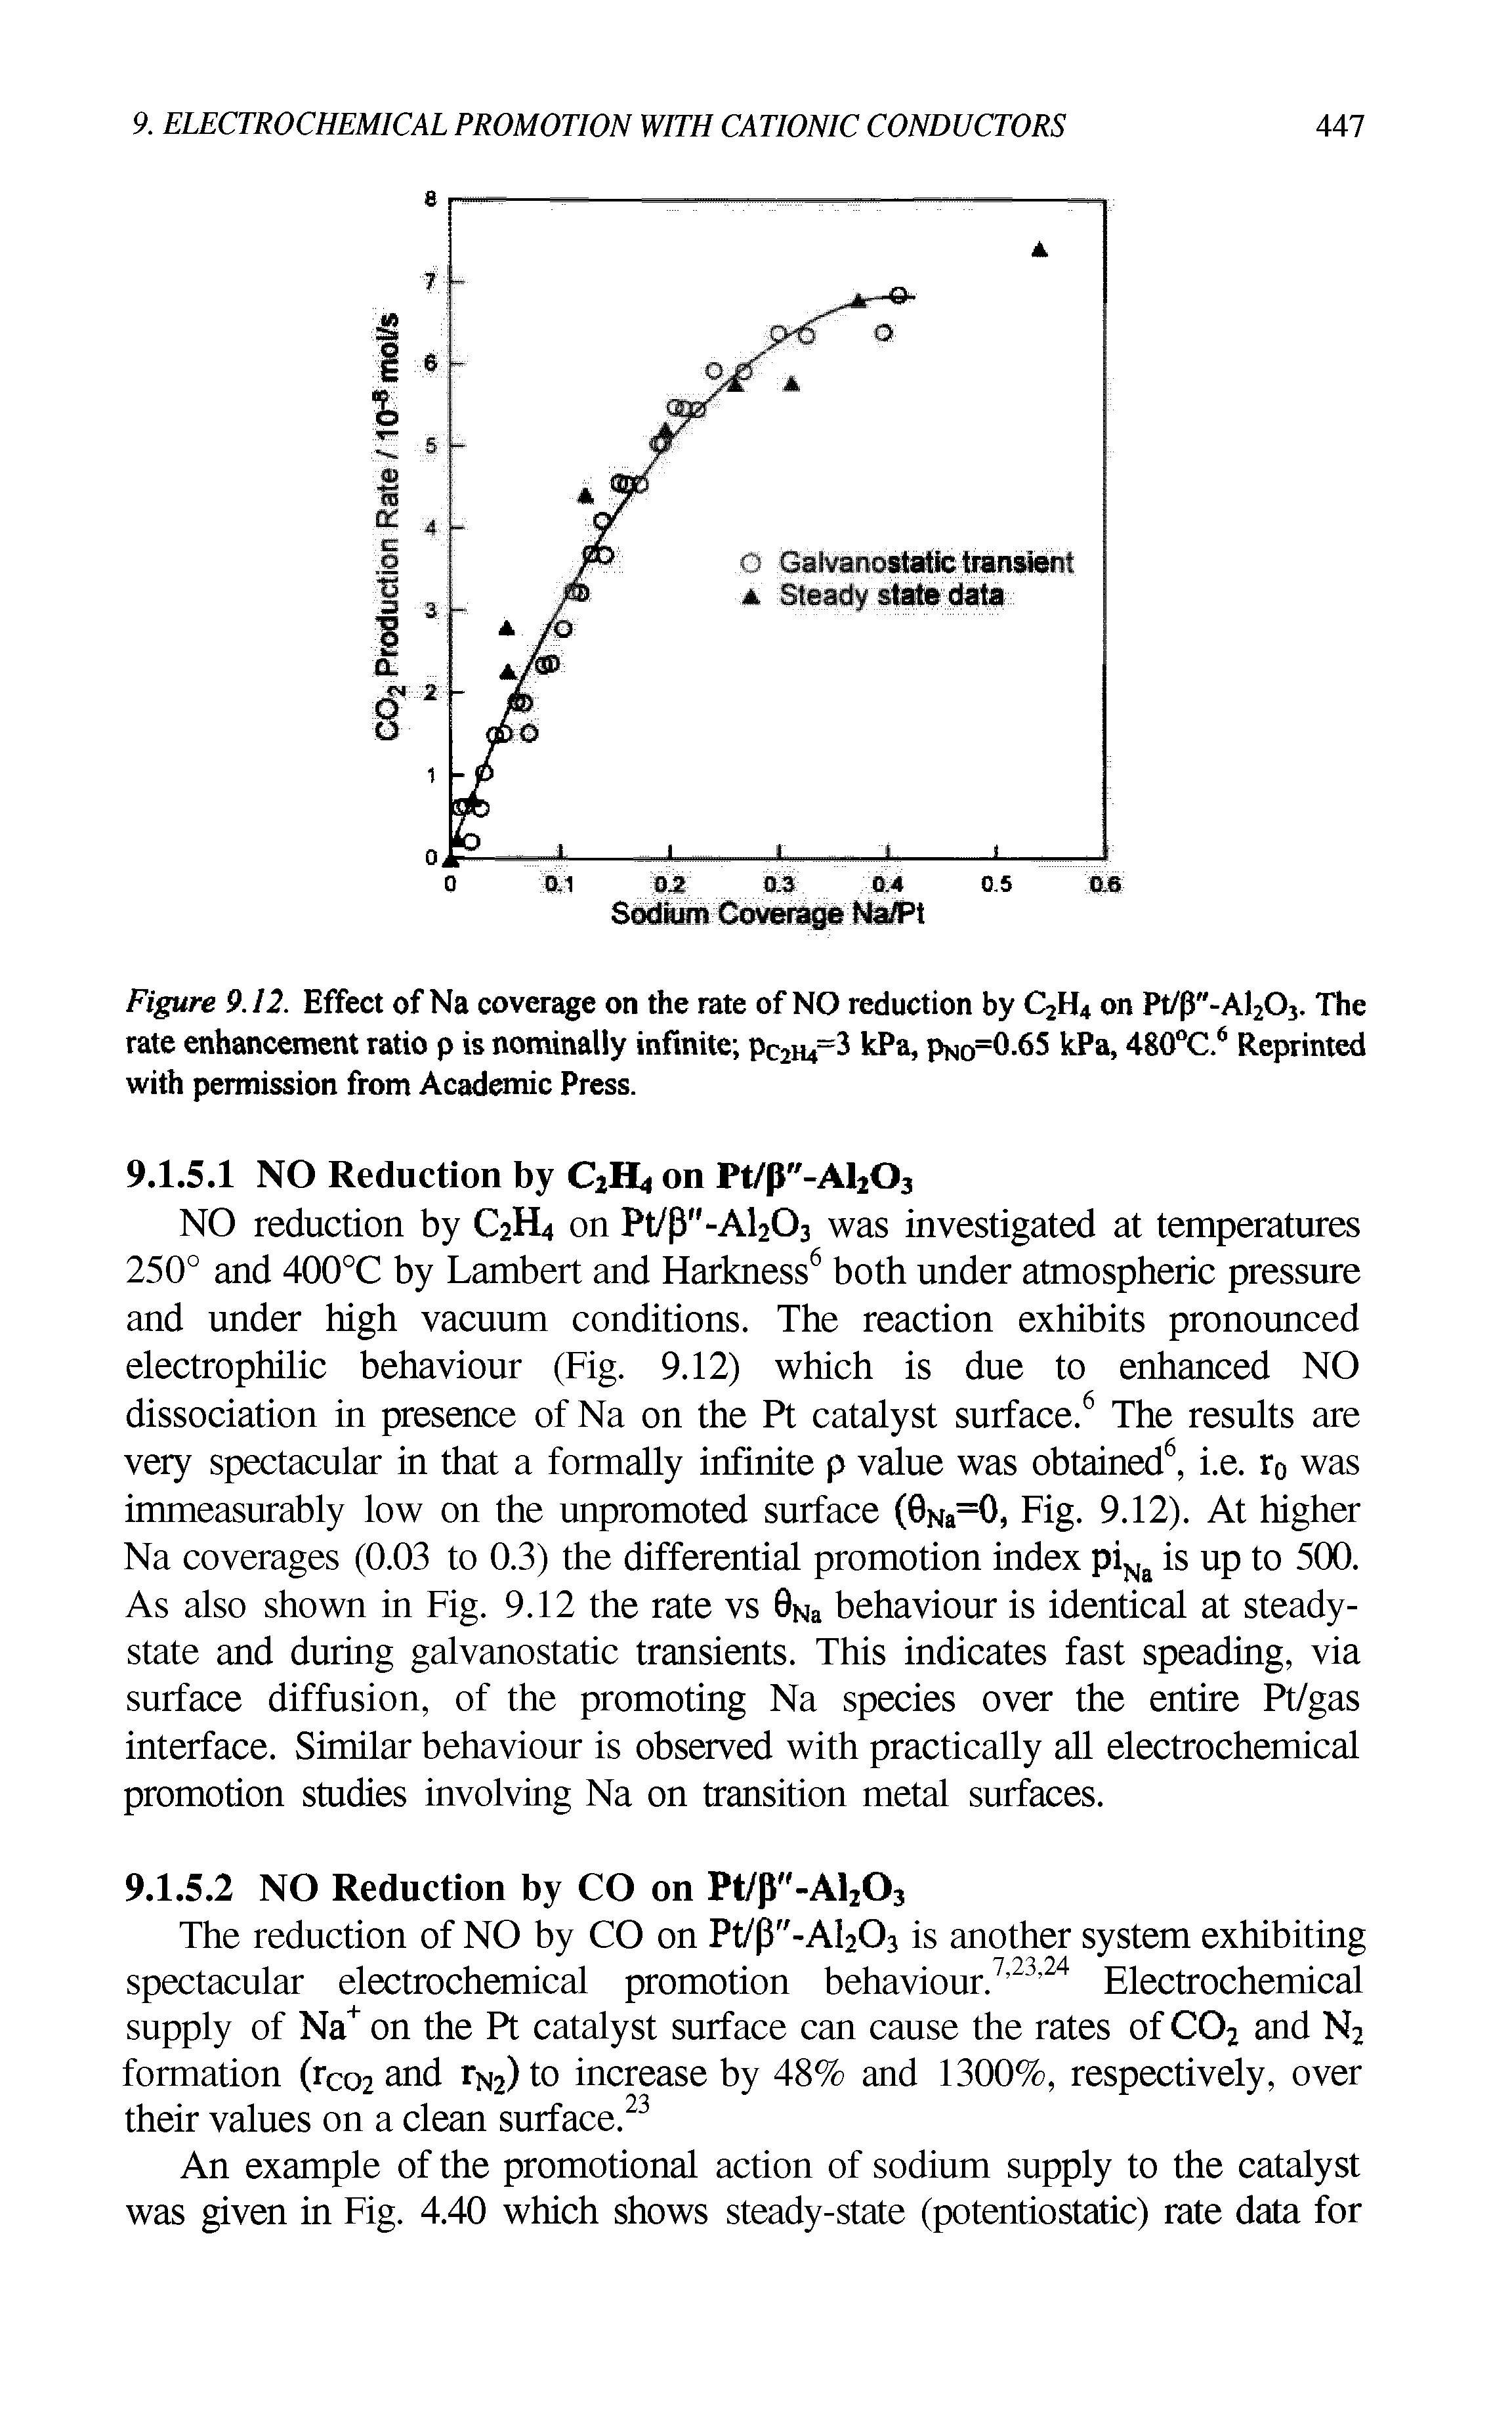 Figure 9.12. Effect of Na coverage on the rate of NO reduction by C2H4 on Pt/p"-Al203. The rate enhancement ratio p is nominally infinite pc2H4=3 kPa, PnO=0.65 kPa, 480°C.6 Reprinted with permission from Academic Press.